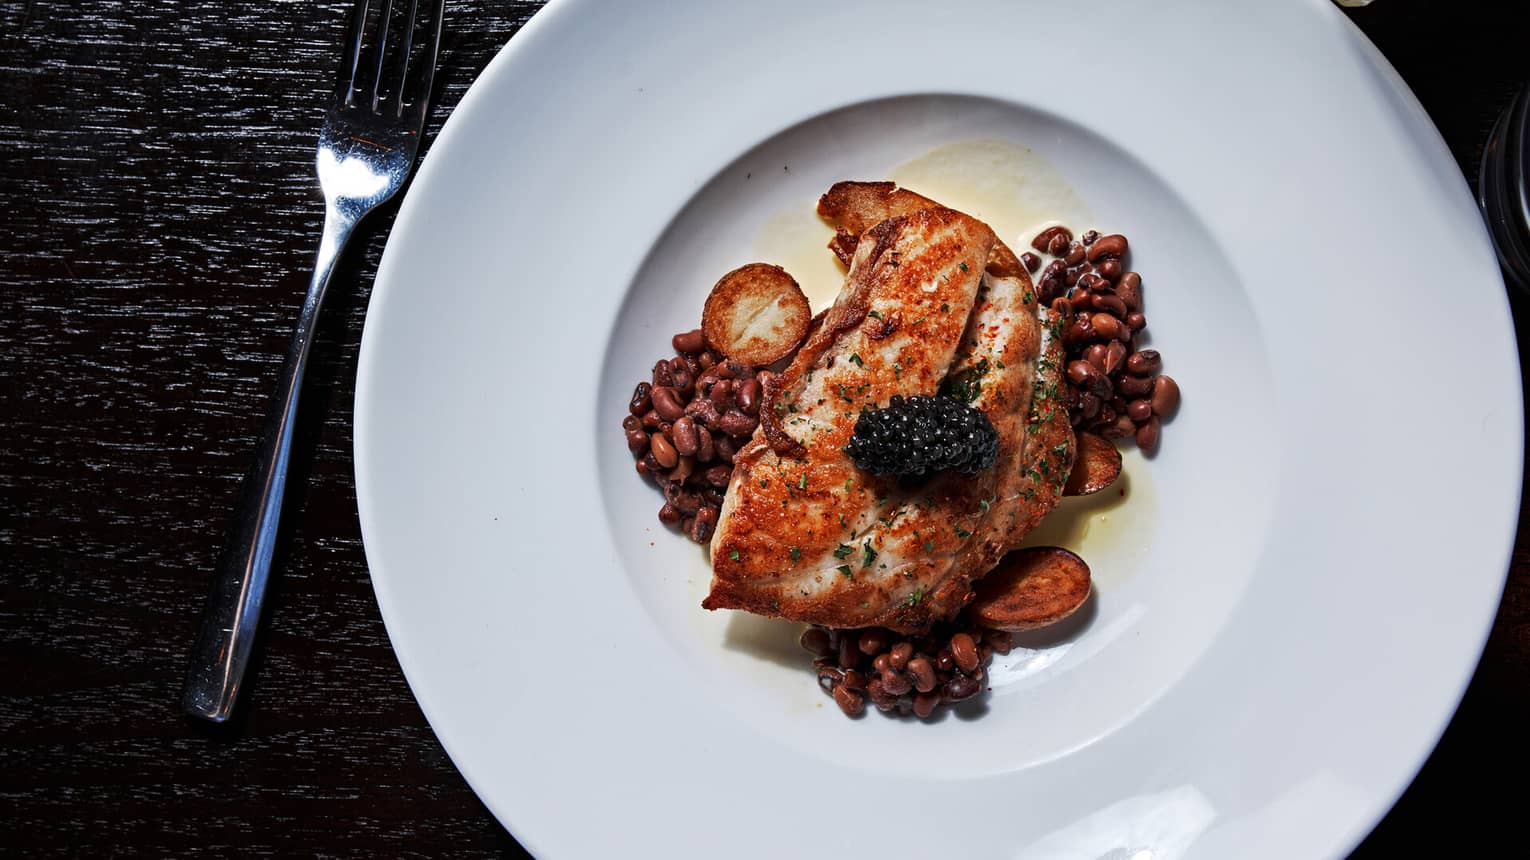 Seared grouper served with field peas, roasted potatoes and lemon sauce, garnished with caviar